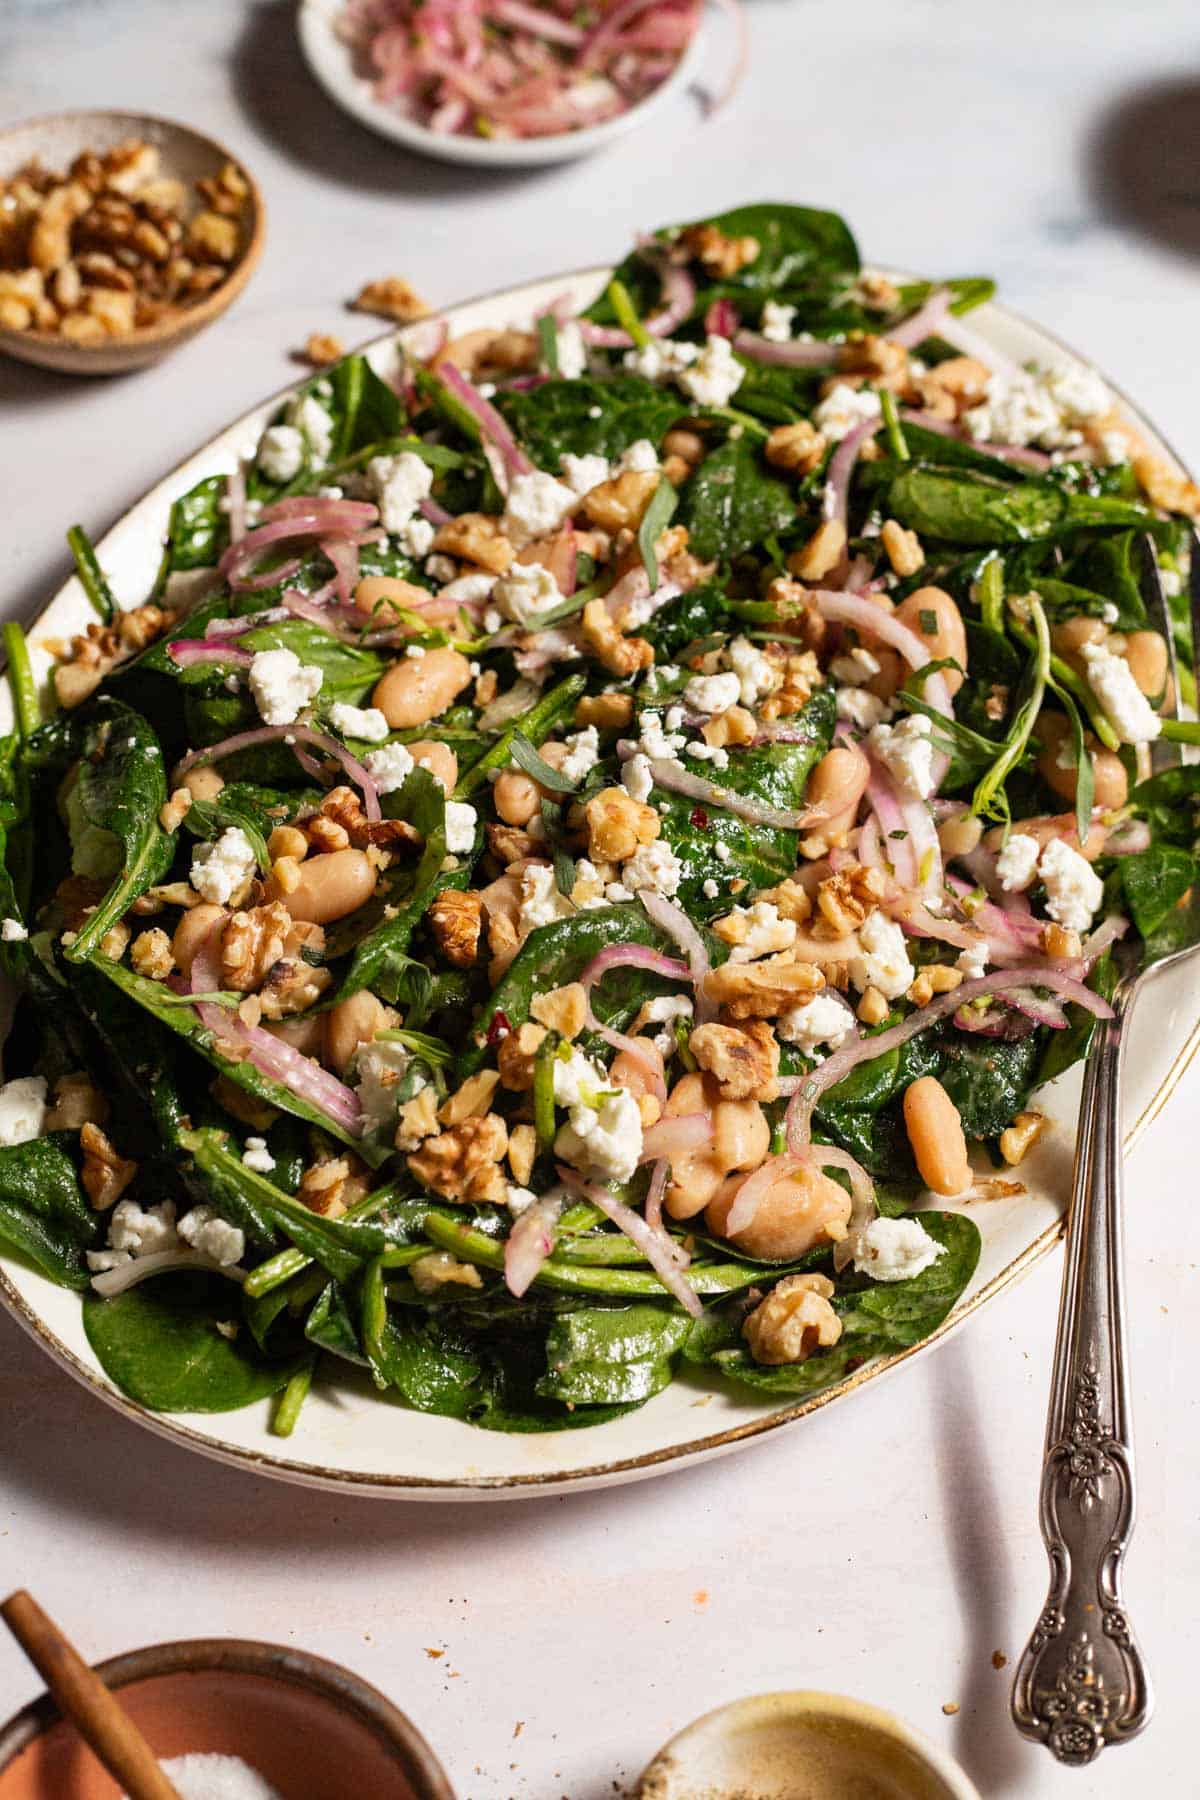 The wilted spinach salad on a serving platter with a fork. Surrounding this are small bowls of salt, walnuts, and pickled onions.